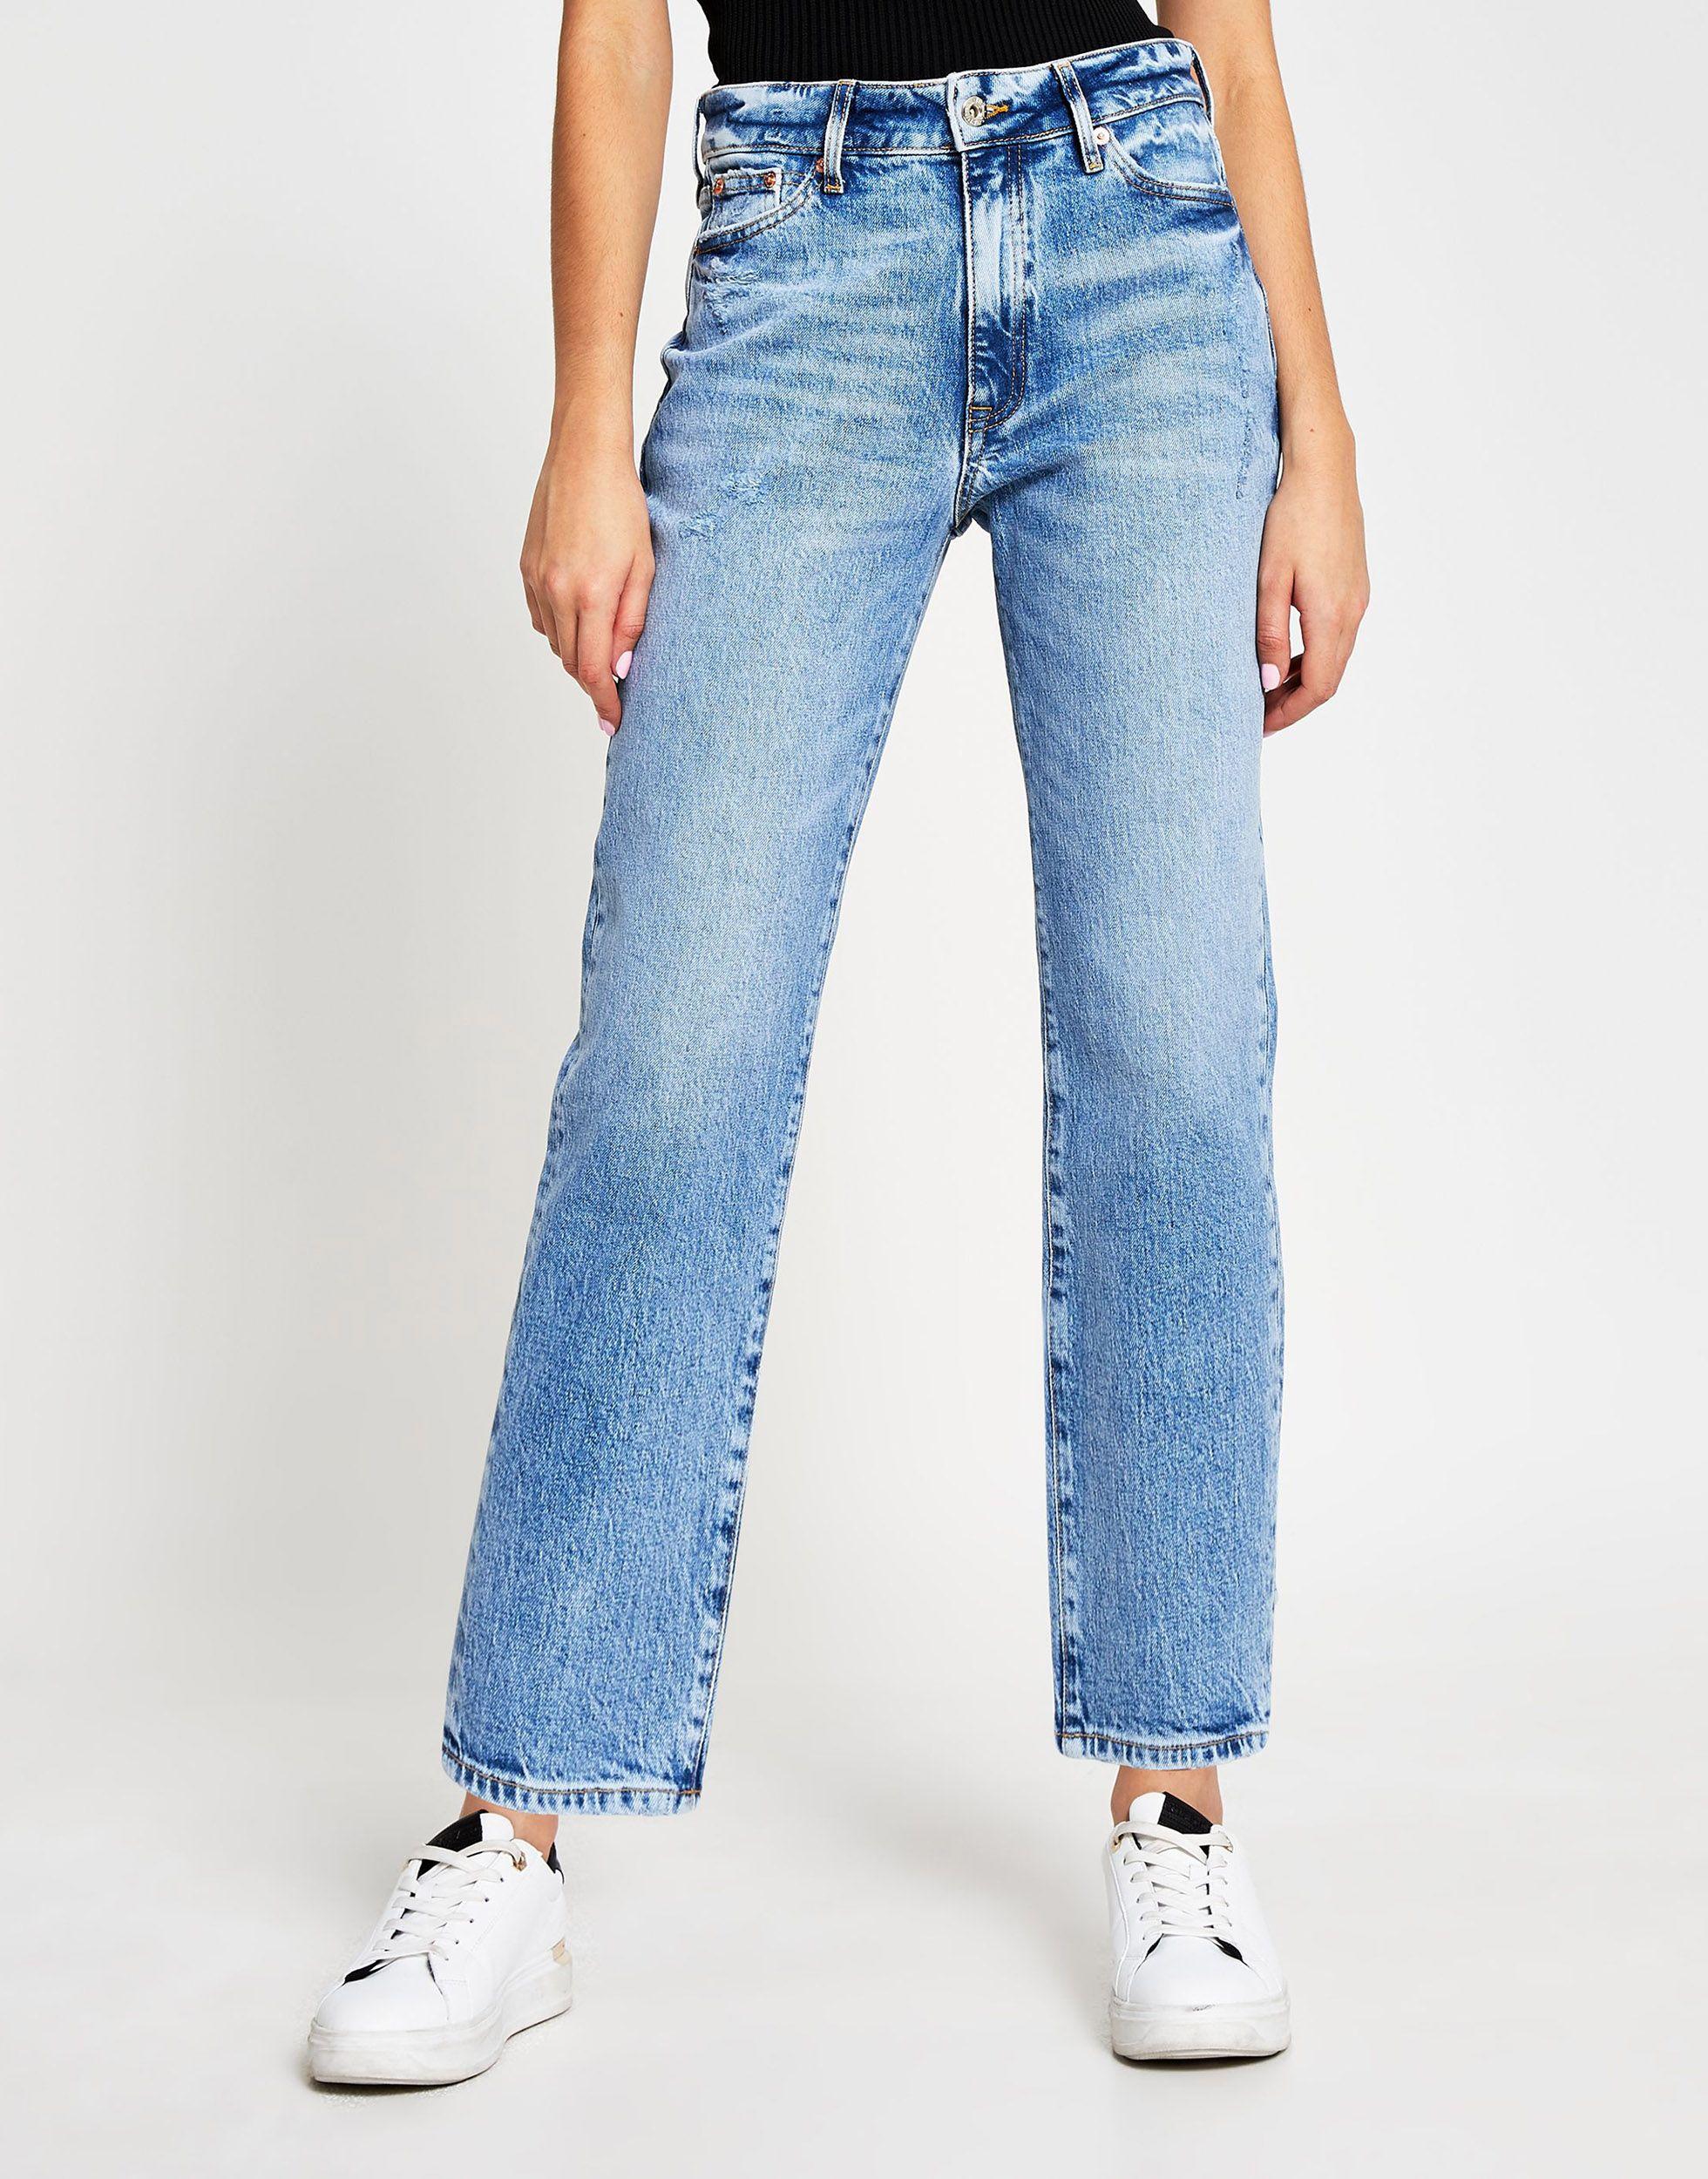 River Island Blair High Rise Straight Ripped Jeans in Blue | Lyst